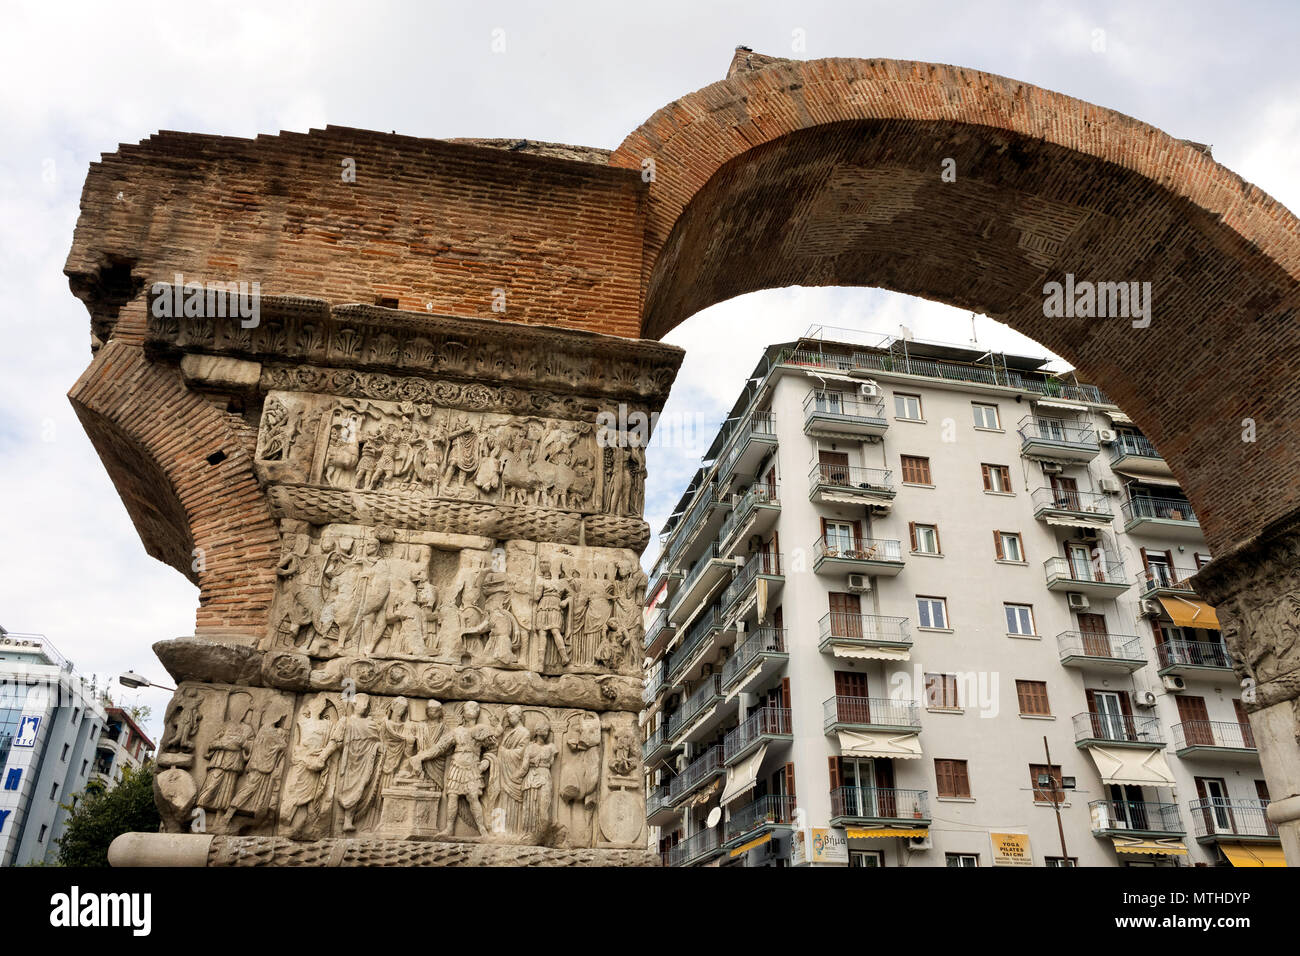 Thessaloniki, Greece, 09/28/2017: Arch of Galerius and buildings in the background Stock Photo